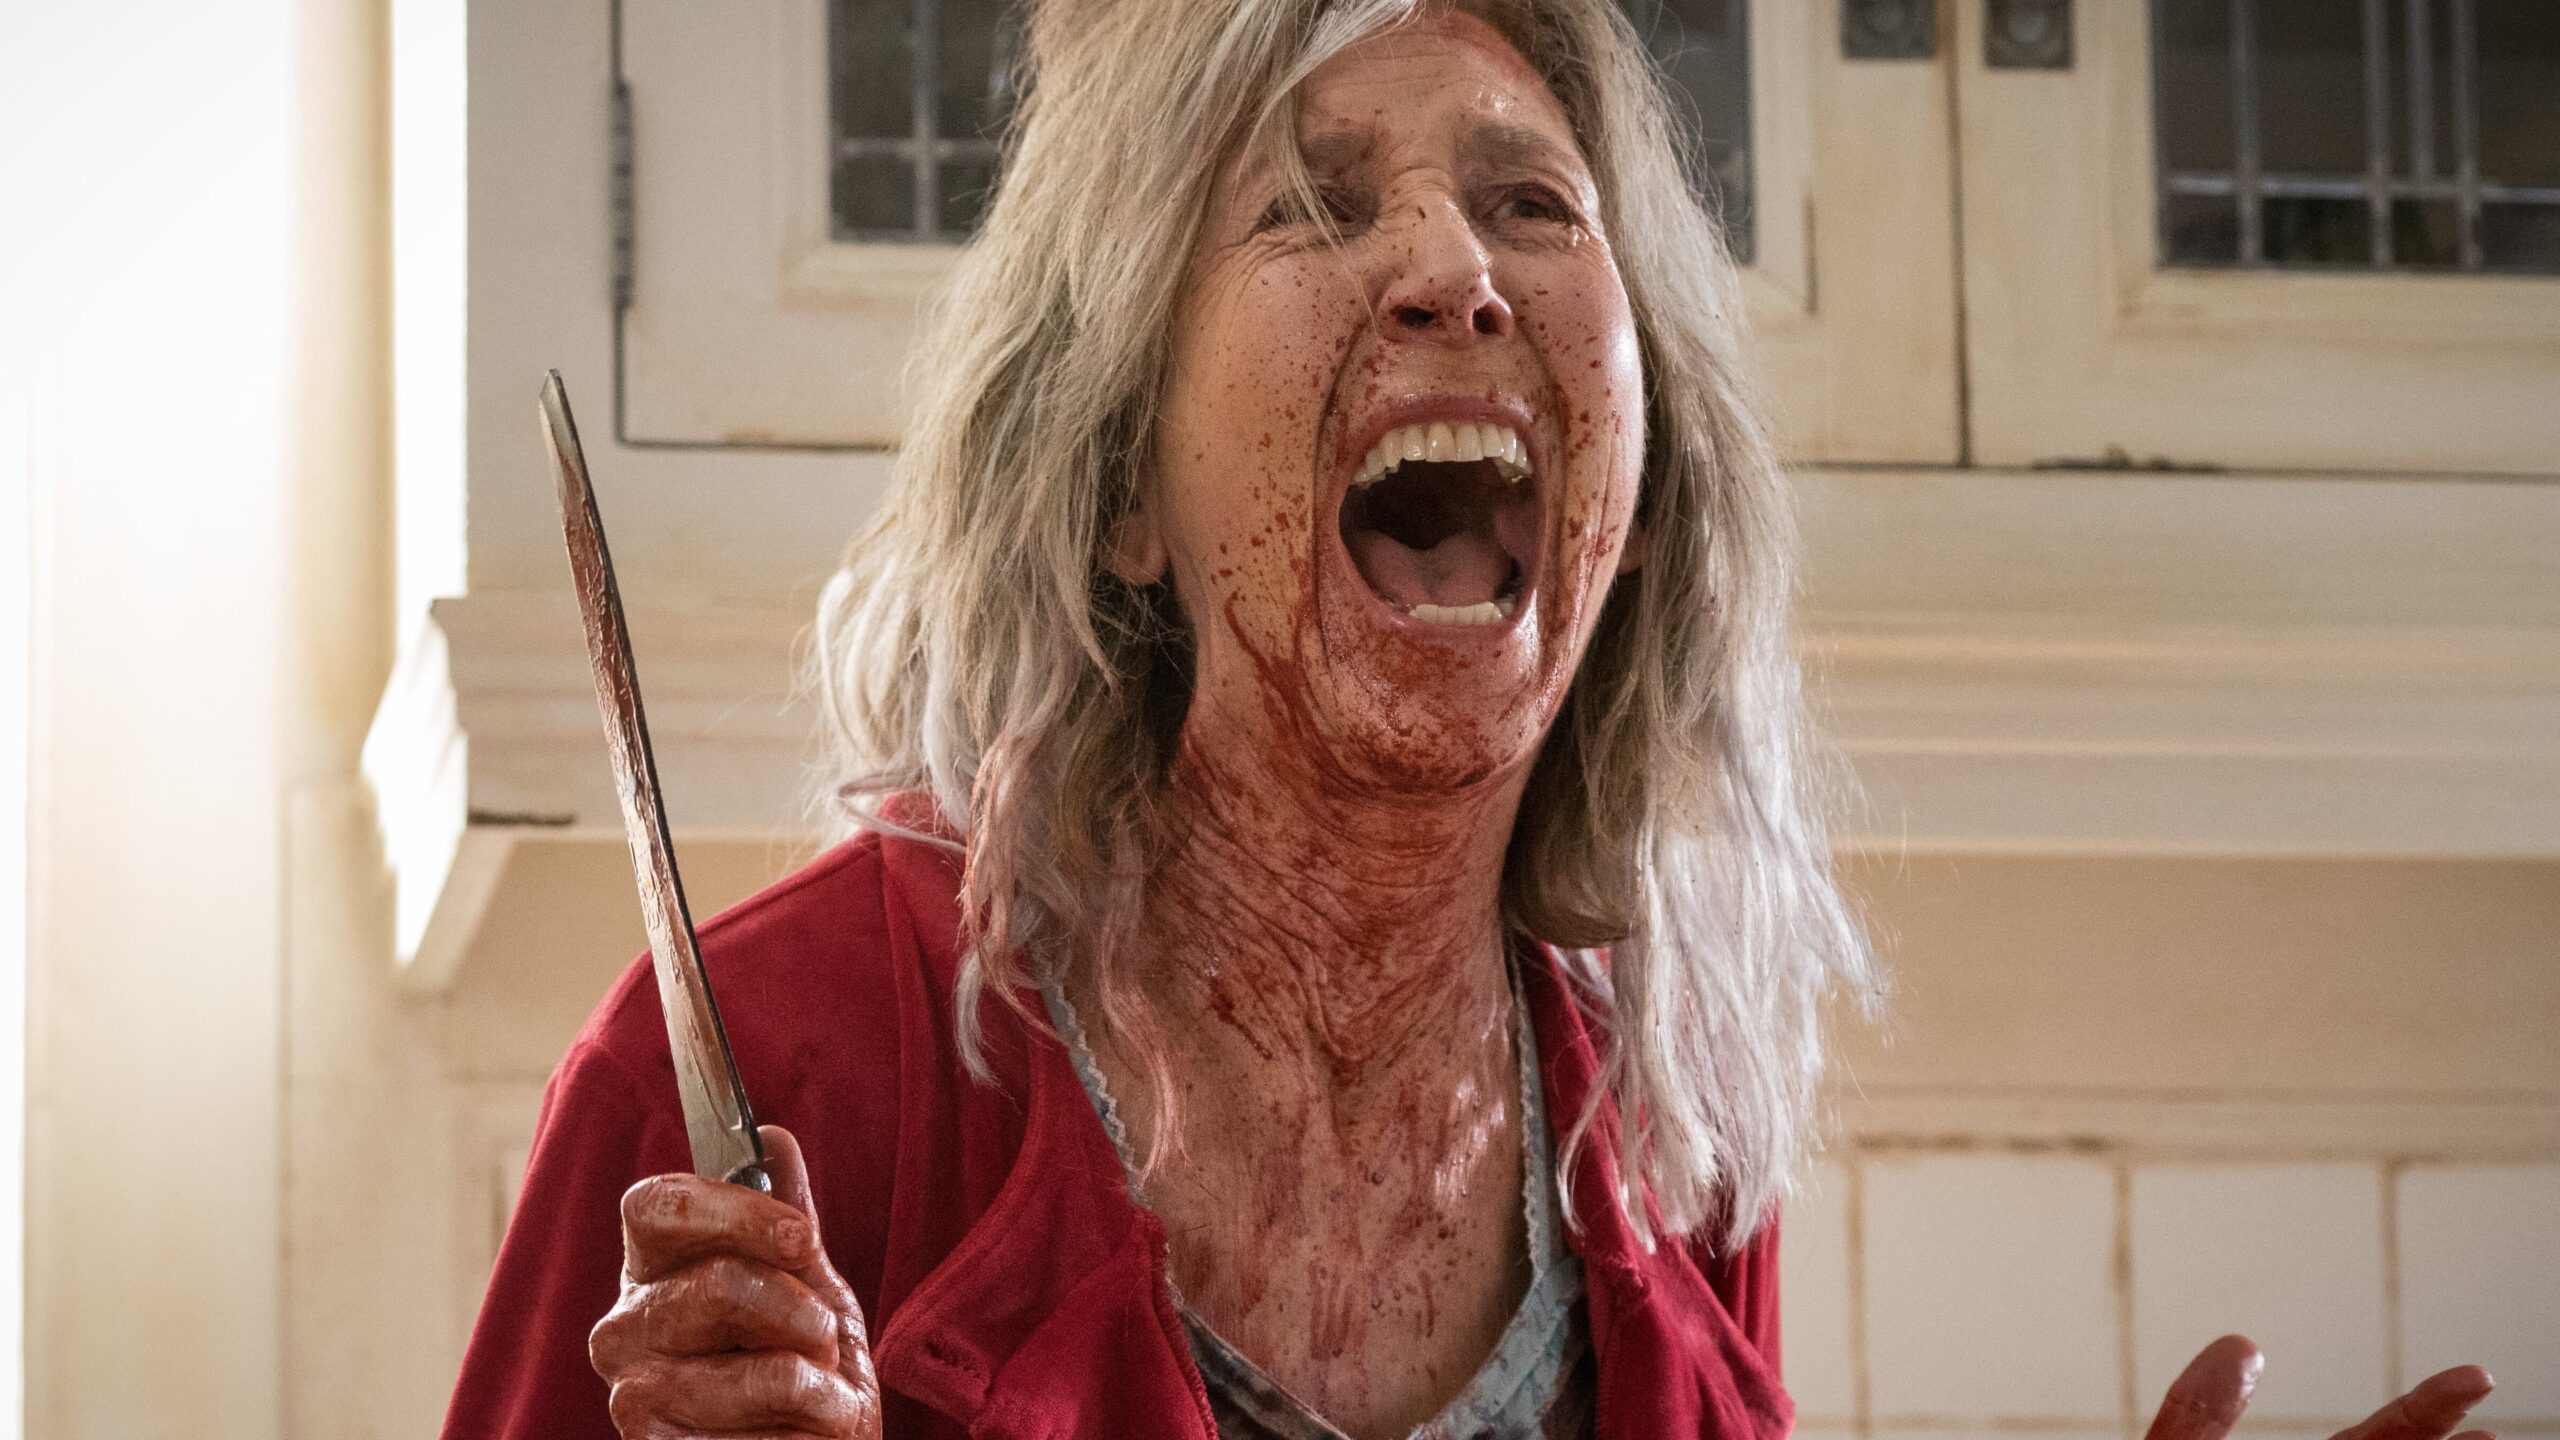 Rage, fear in ‘The Grudge’ remake: An interview with ‘Queen of Horror’ Lin Shaye